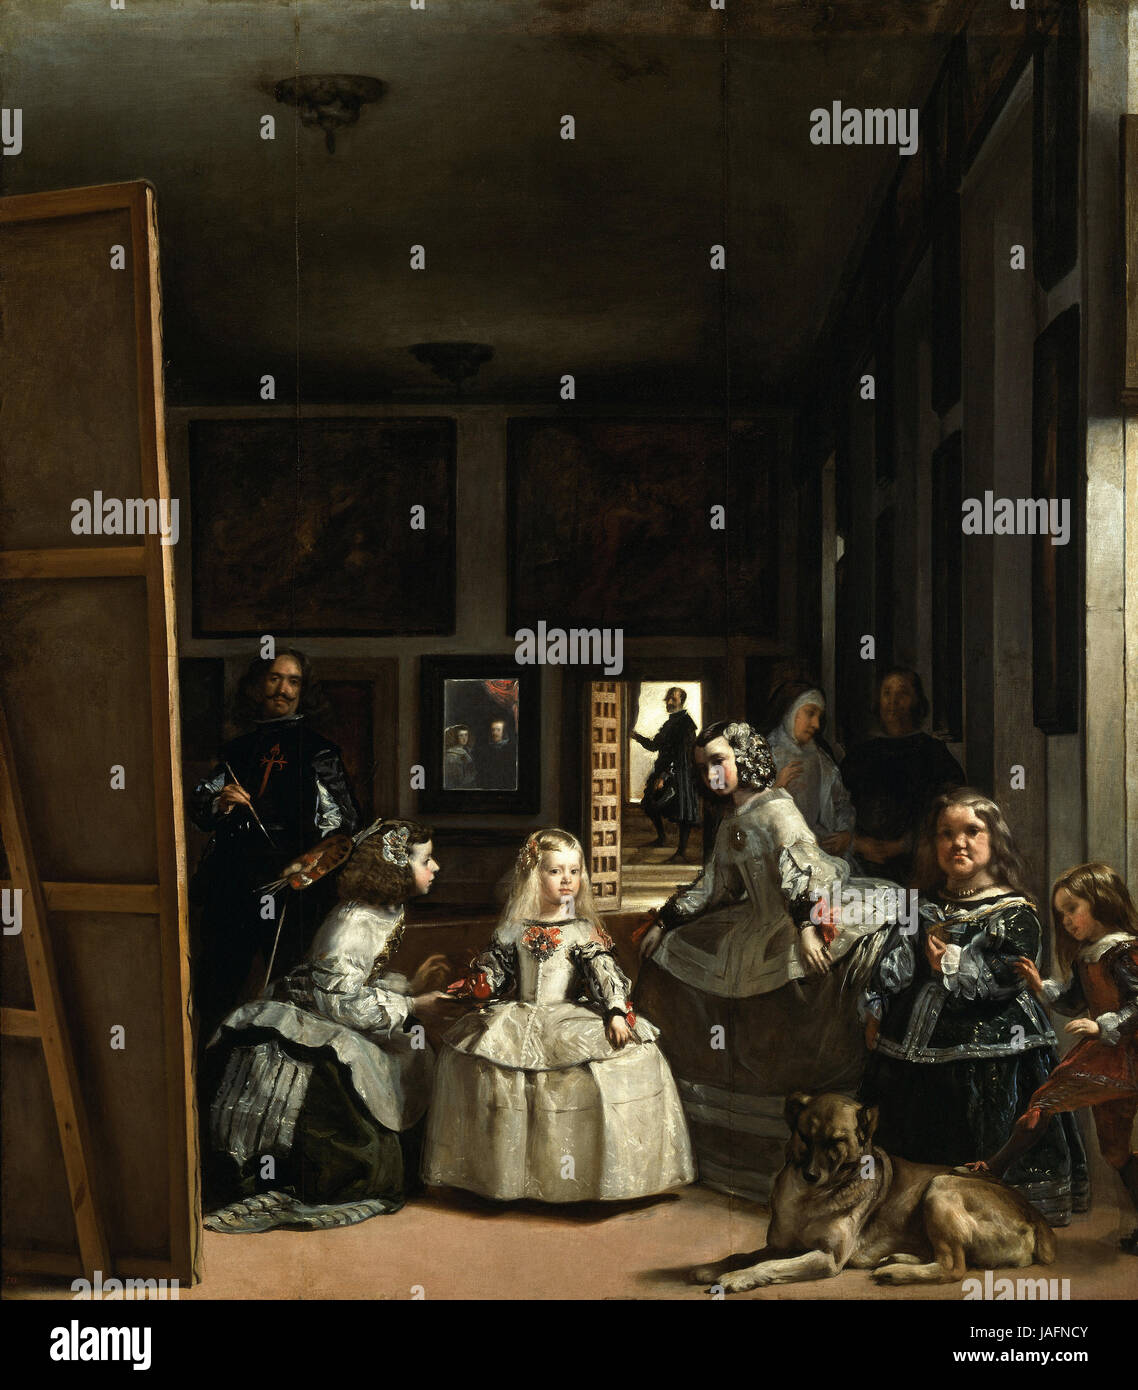 Pierre Audouin  Las Meninas: the family of Philip IV in the foreground  with the Infanta Margarita in the centre, Velázquez standing painting at  left, the King and Queen reflected in the